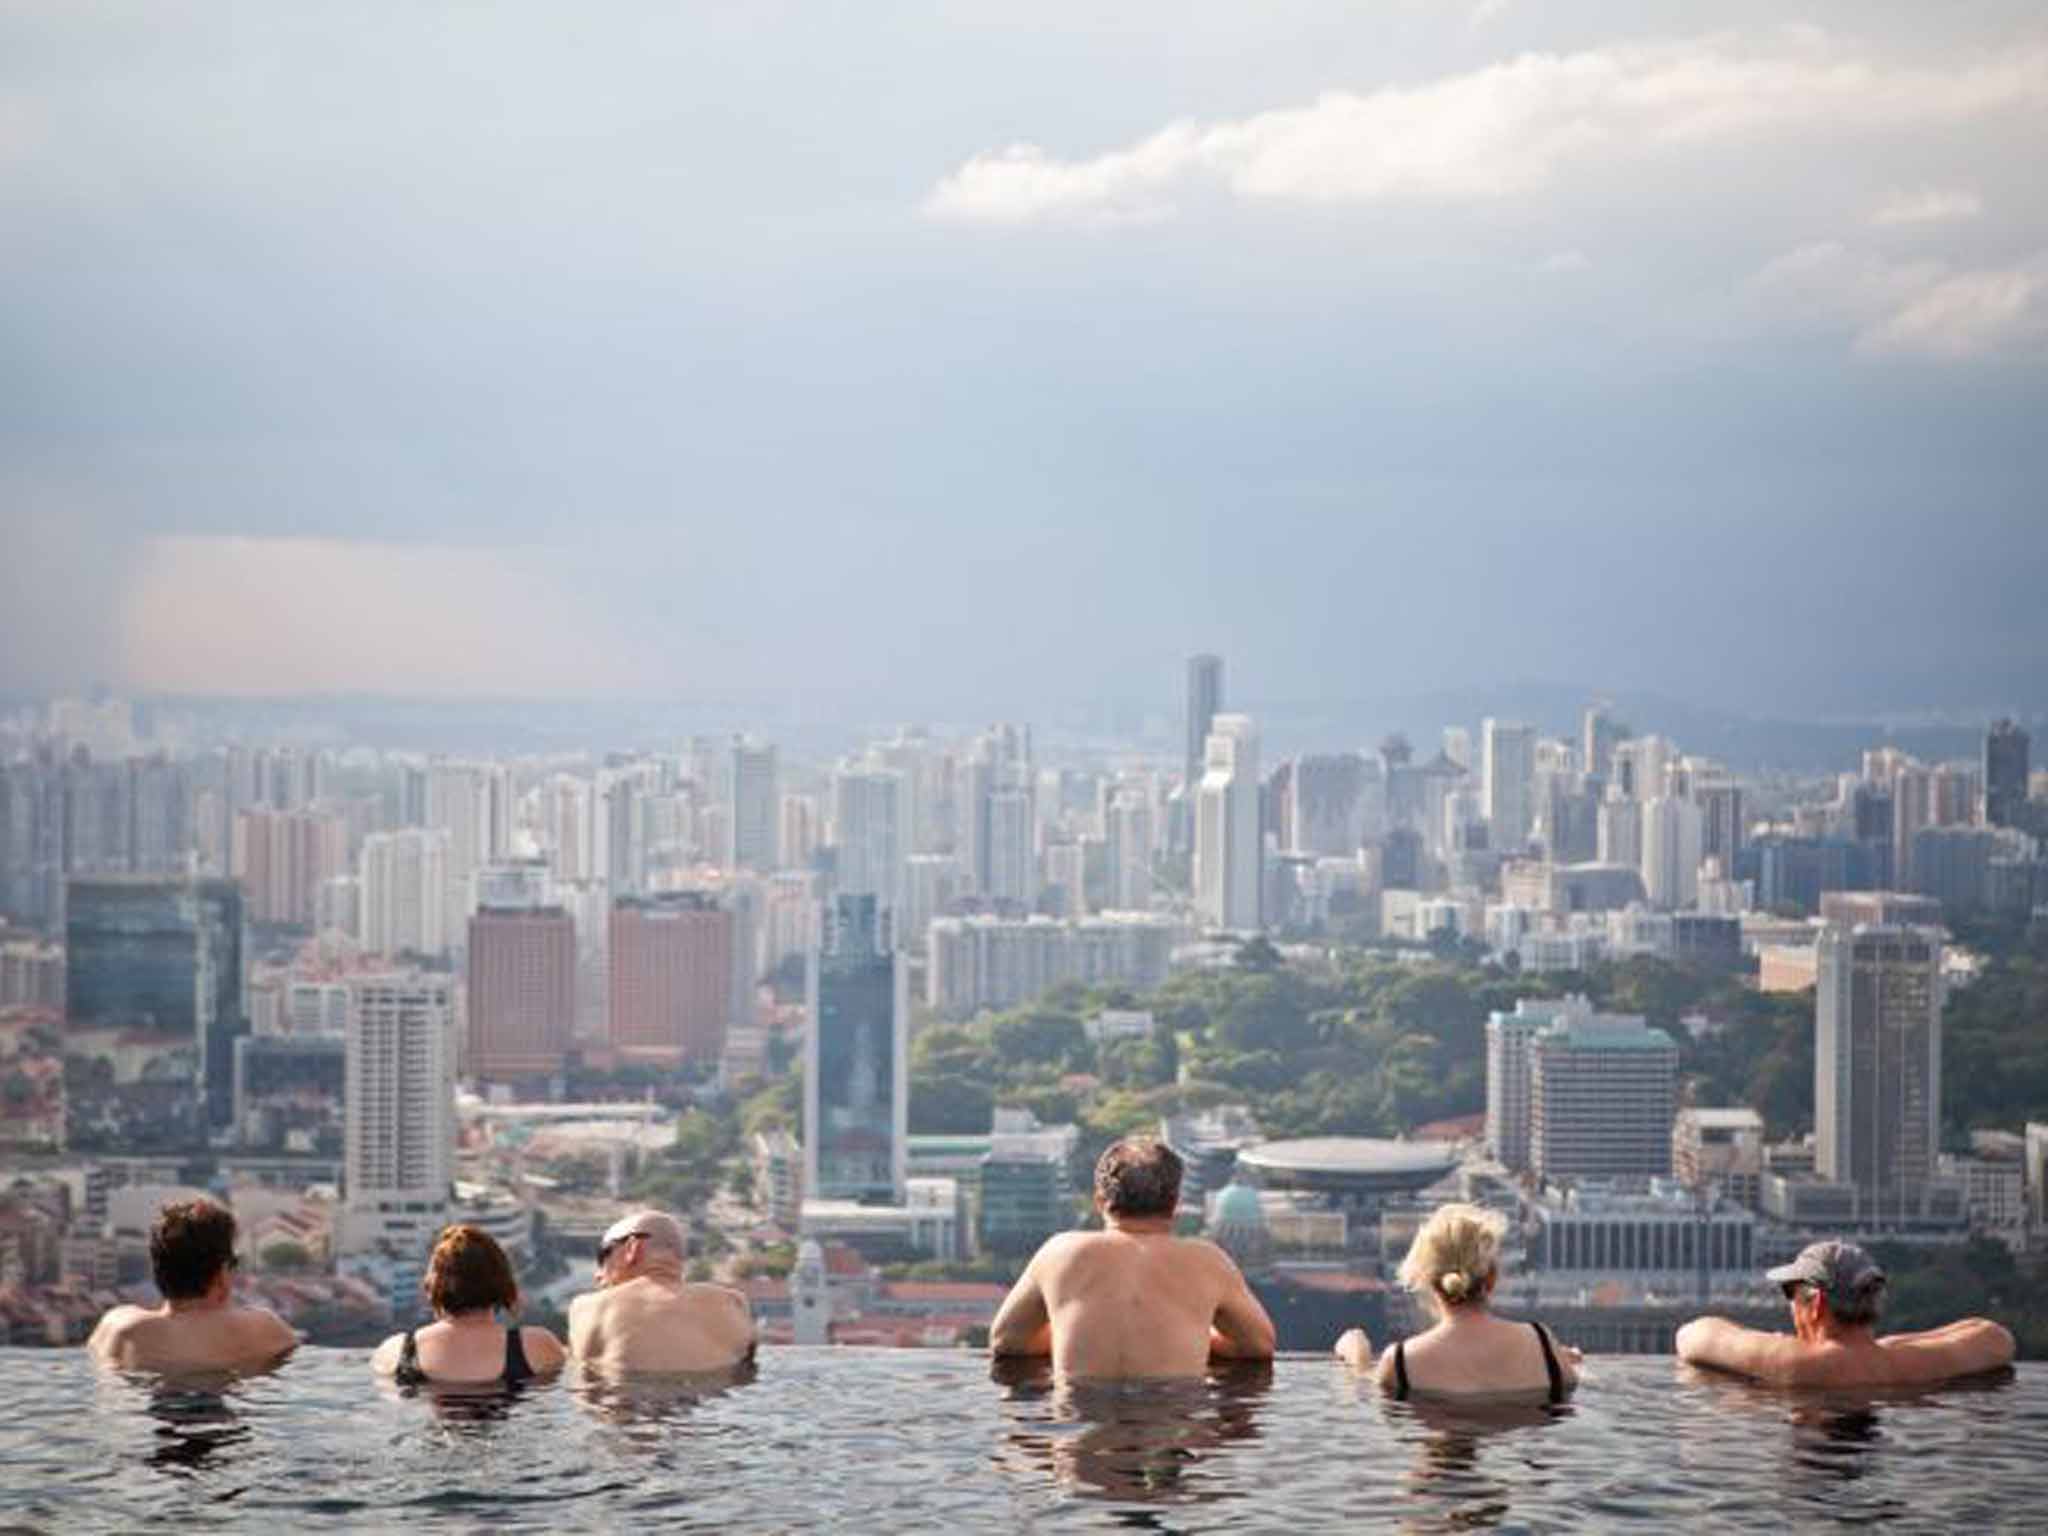 Pool with a view: the mMarina Bay Sands in Singapore